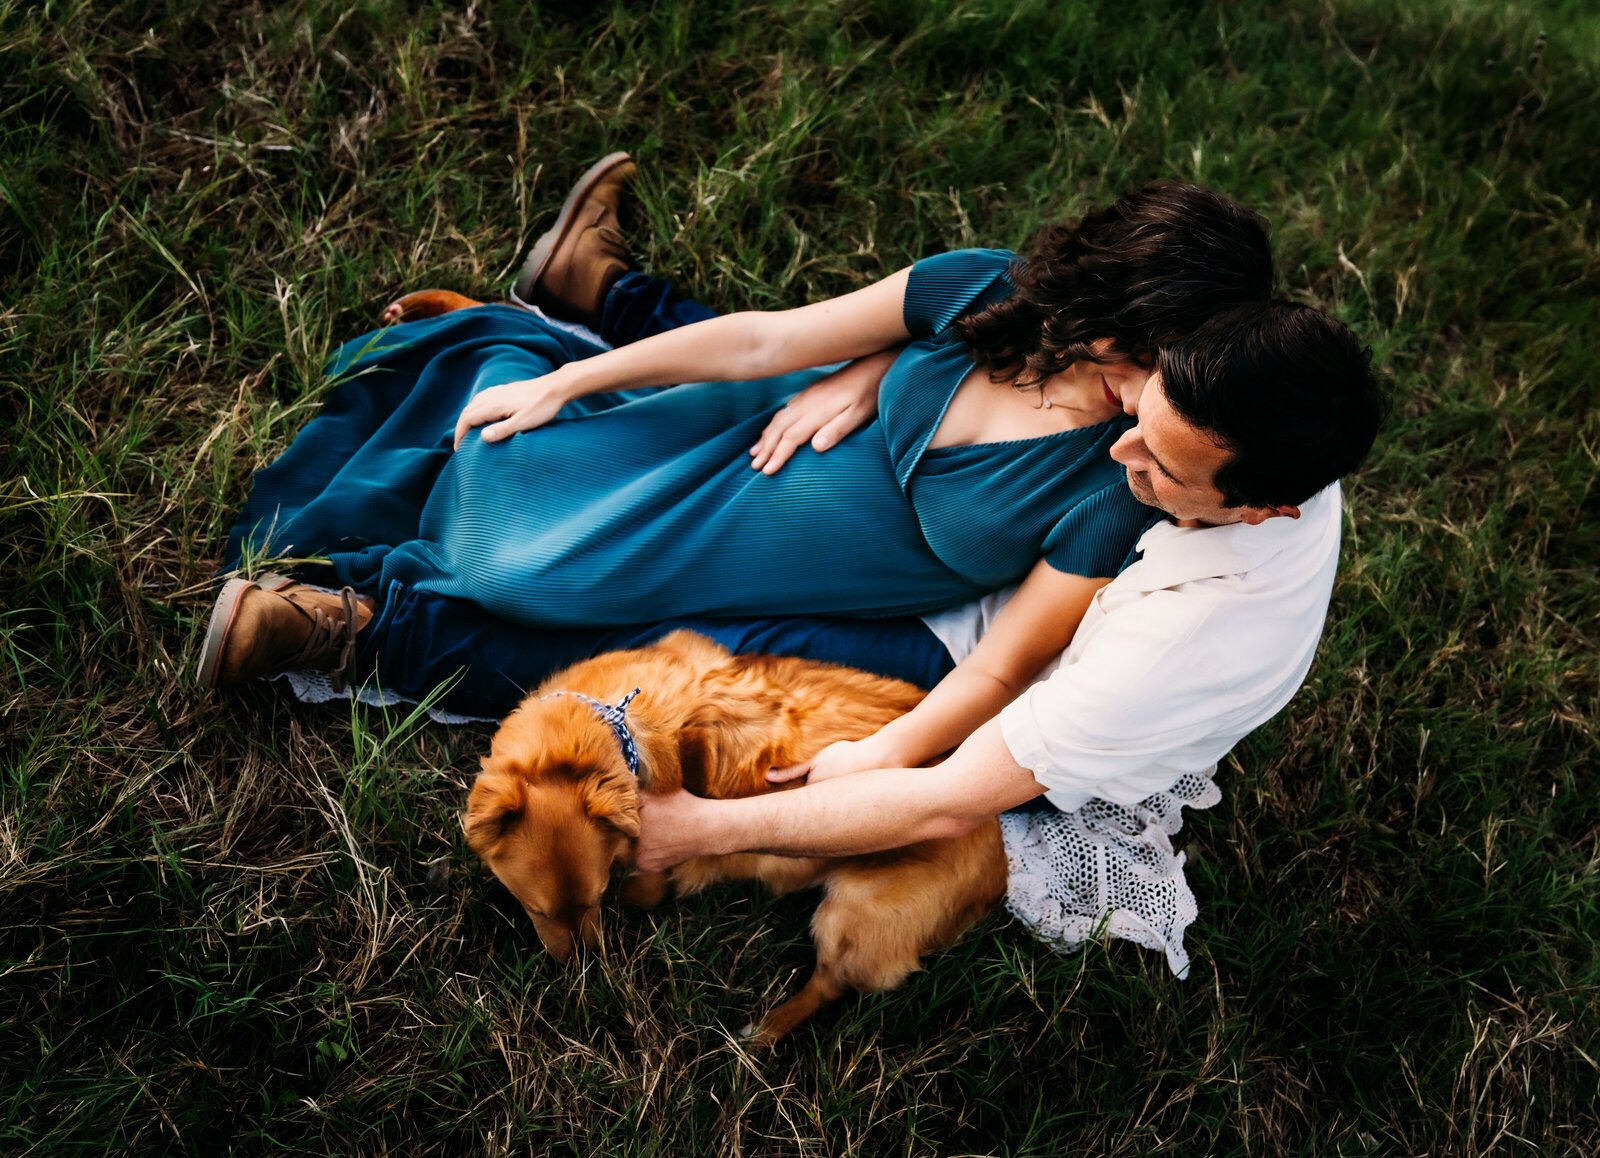 Maternity Photographer, pregnant woman in dress reclines in her husband, dog sits beside them in the grass